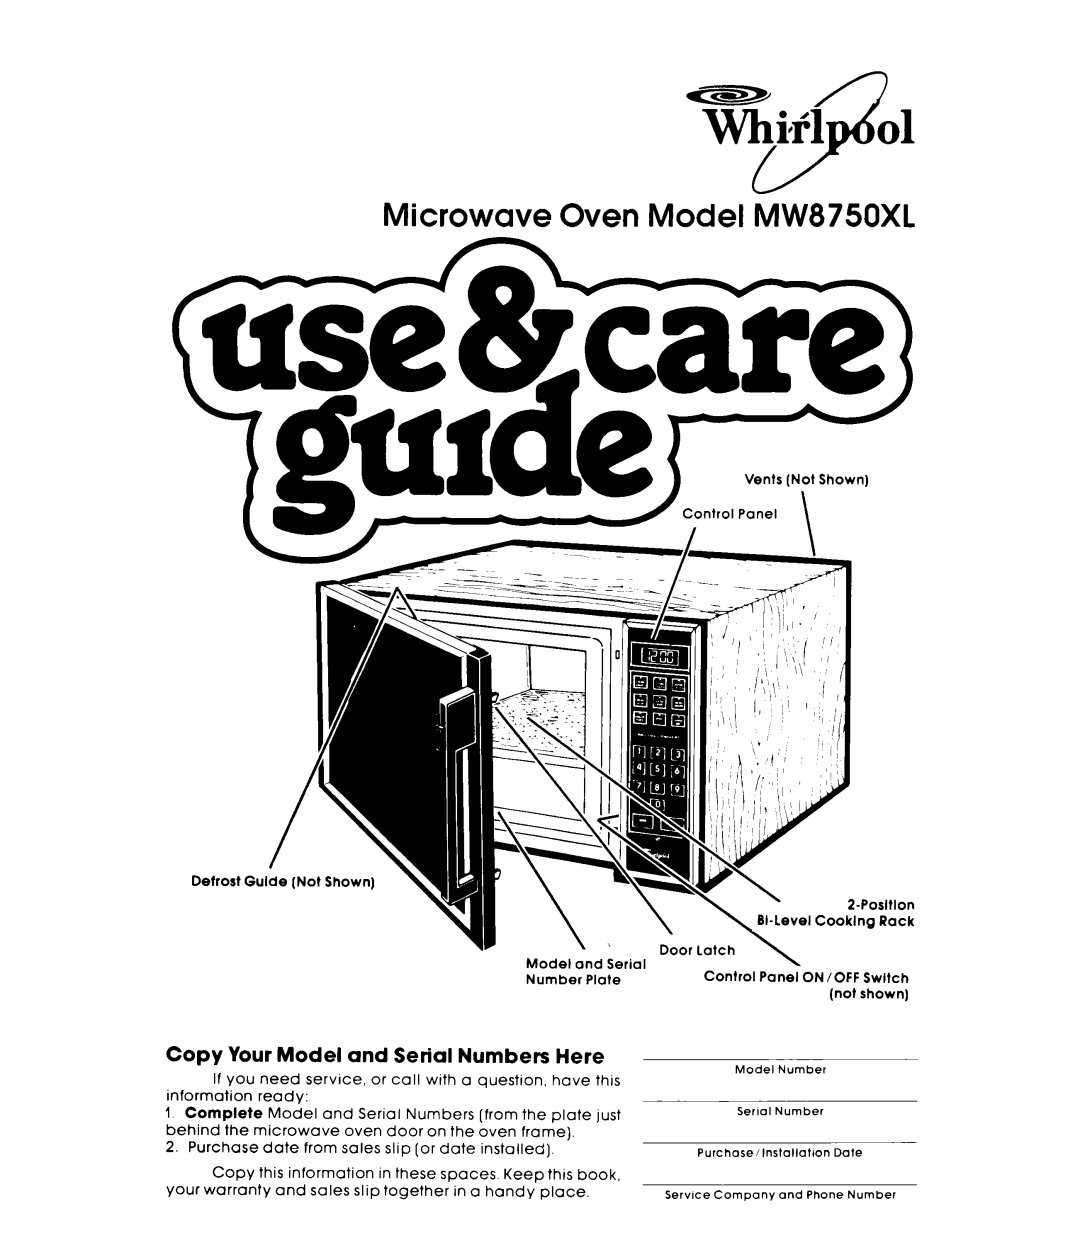 Whirlpool warranty Copy Your Model and Serial Numbers Here, Microwave Oven Model MW8750XL 